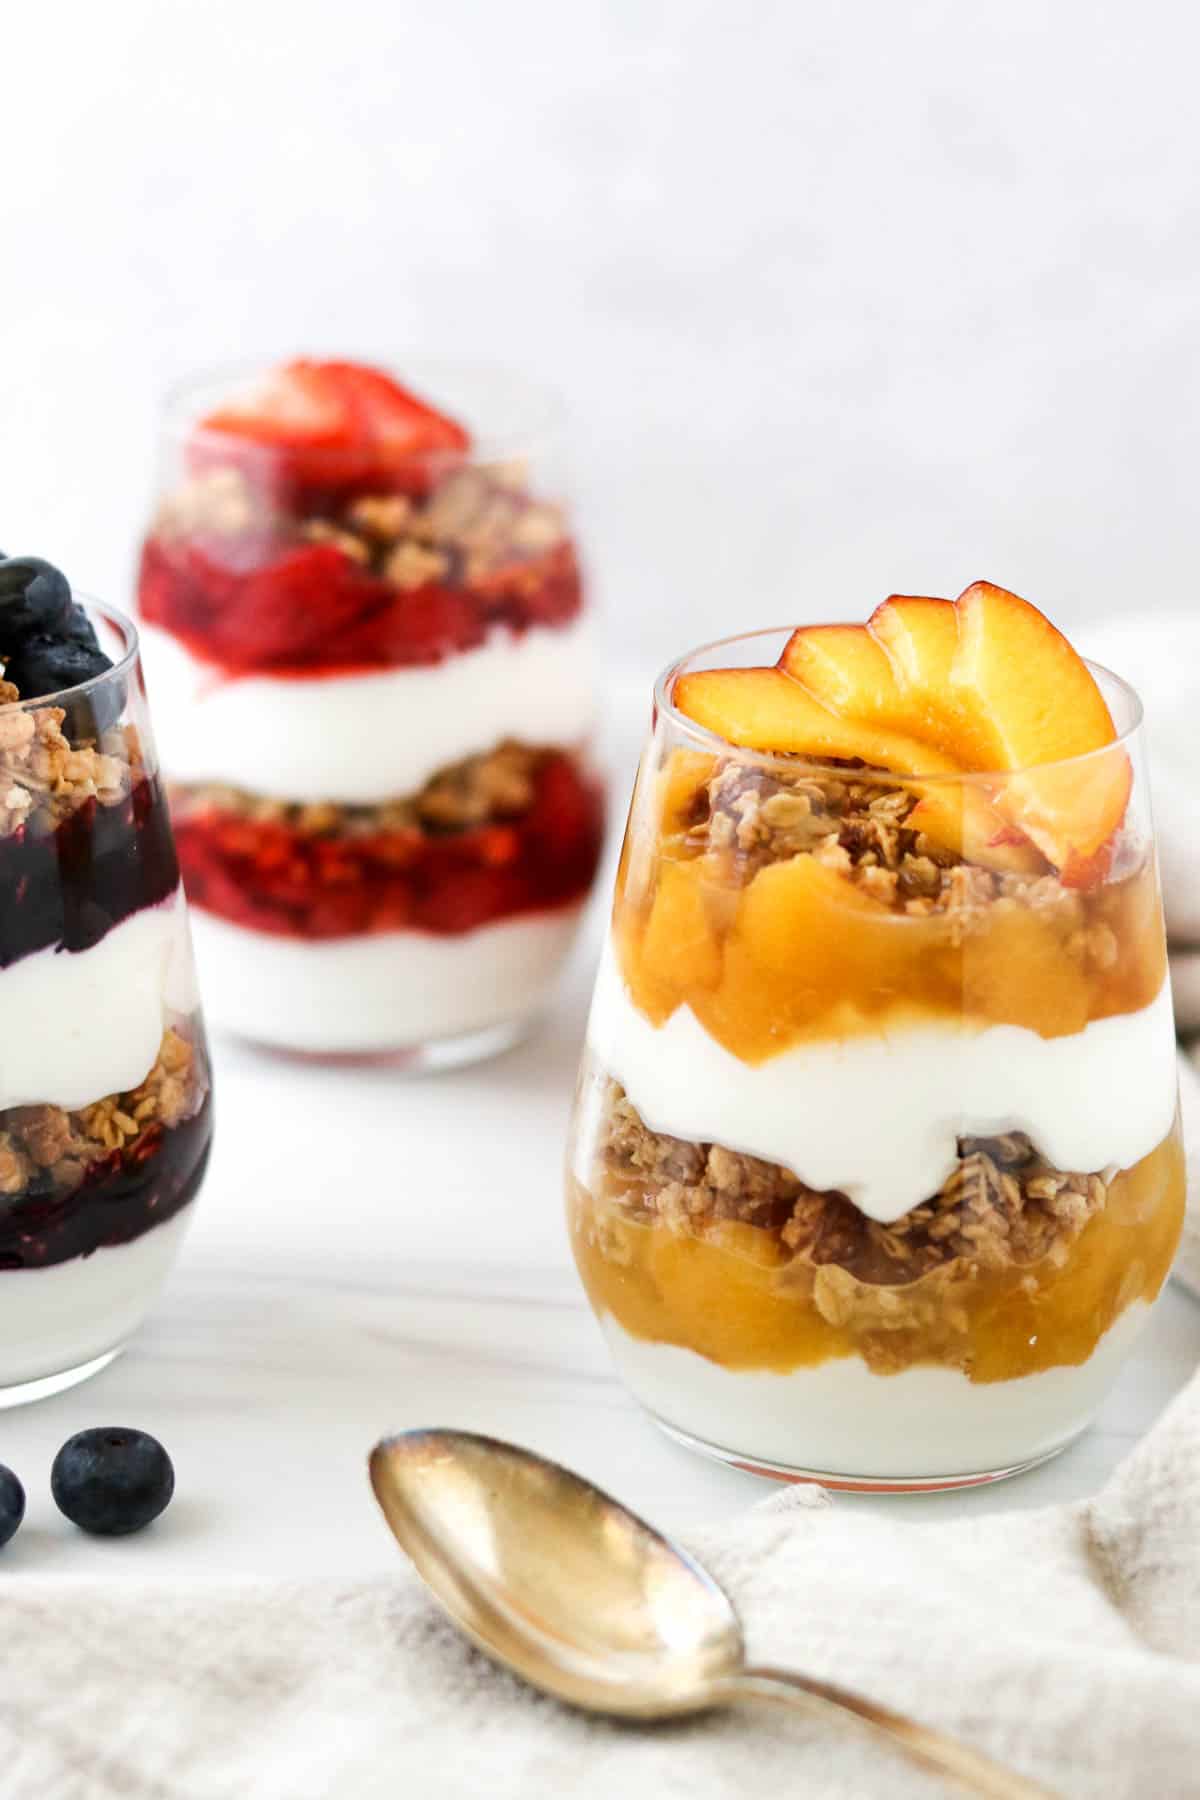 Peach, blueberry and strawberry yogurt parfaits next to a spoon and fresh blueberries.